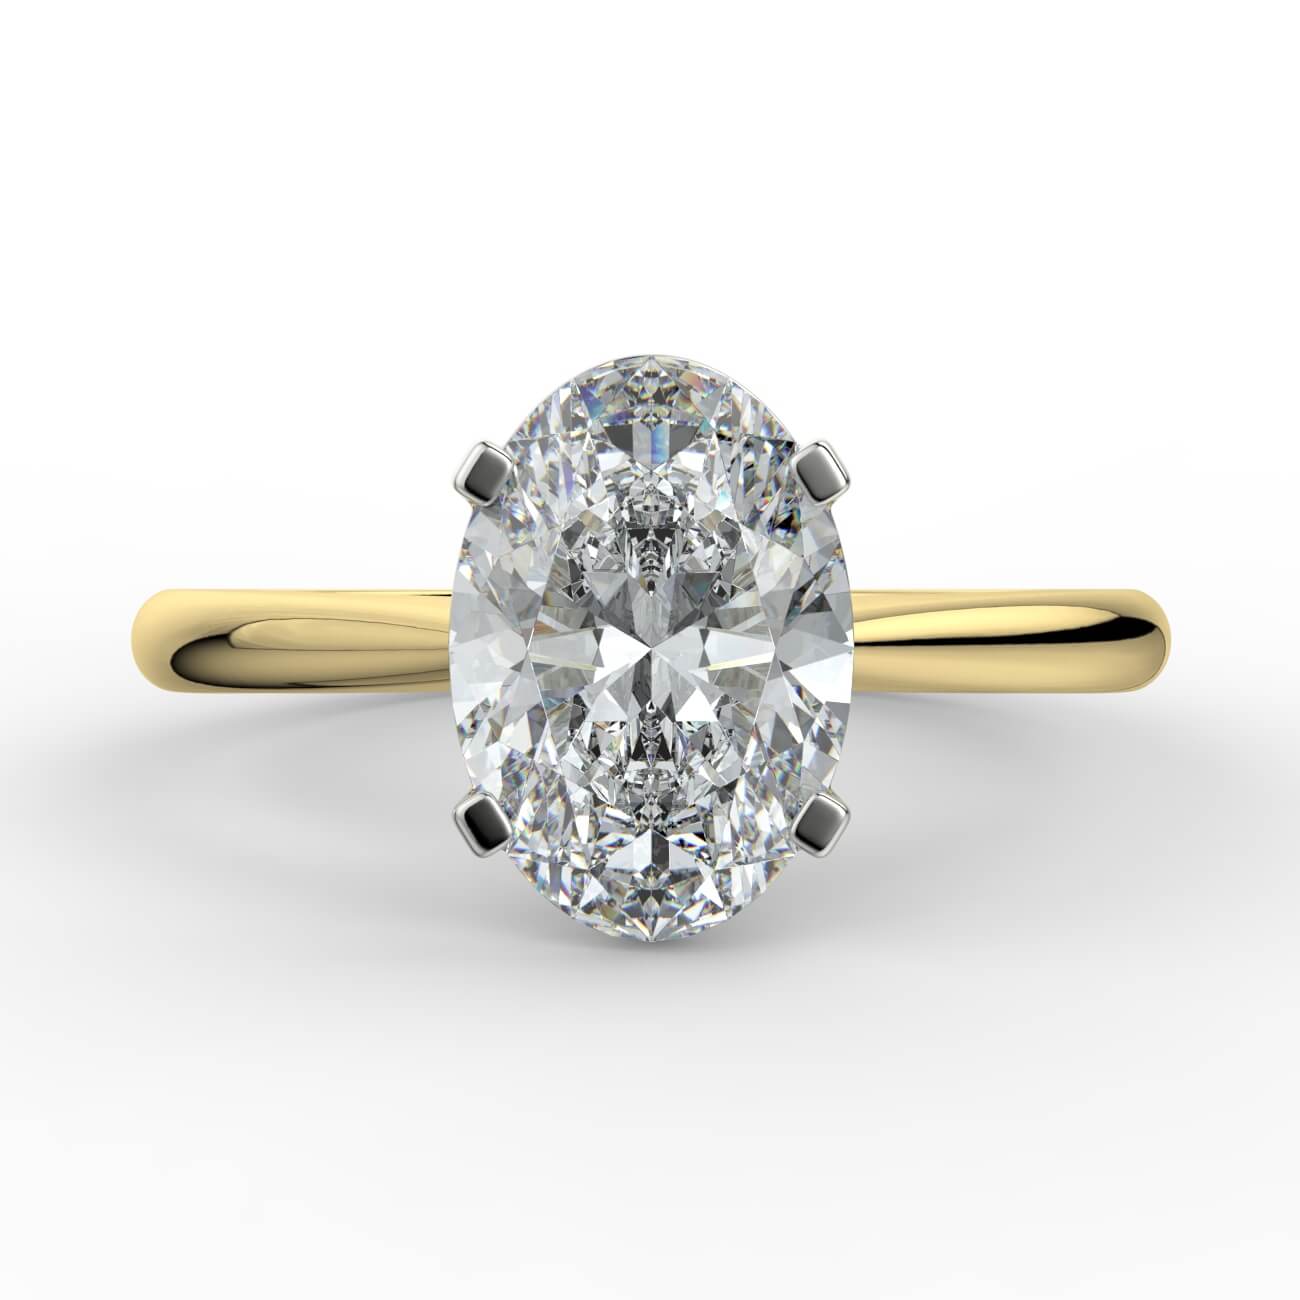 Oval cut diamond cathedral engagement ring in white and yellow gold – Australian Diamond Network